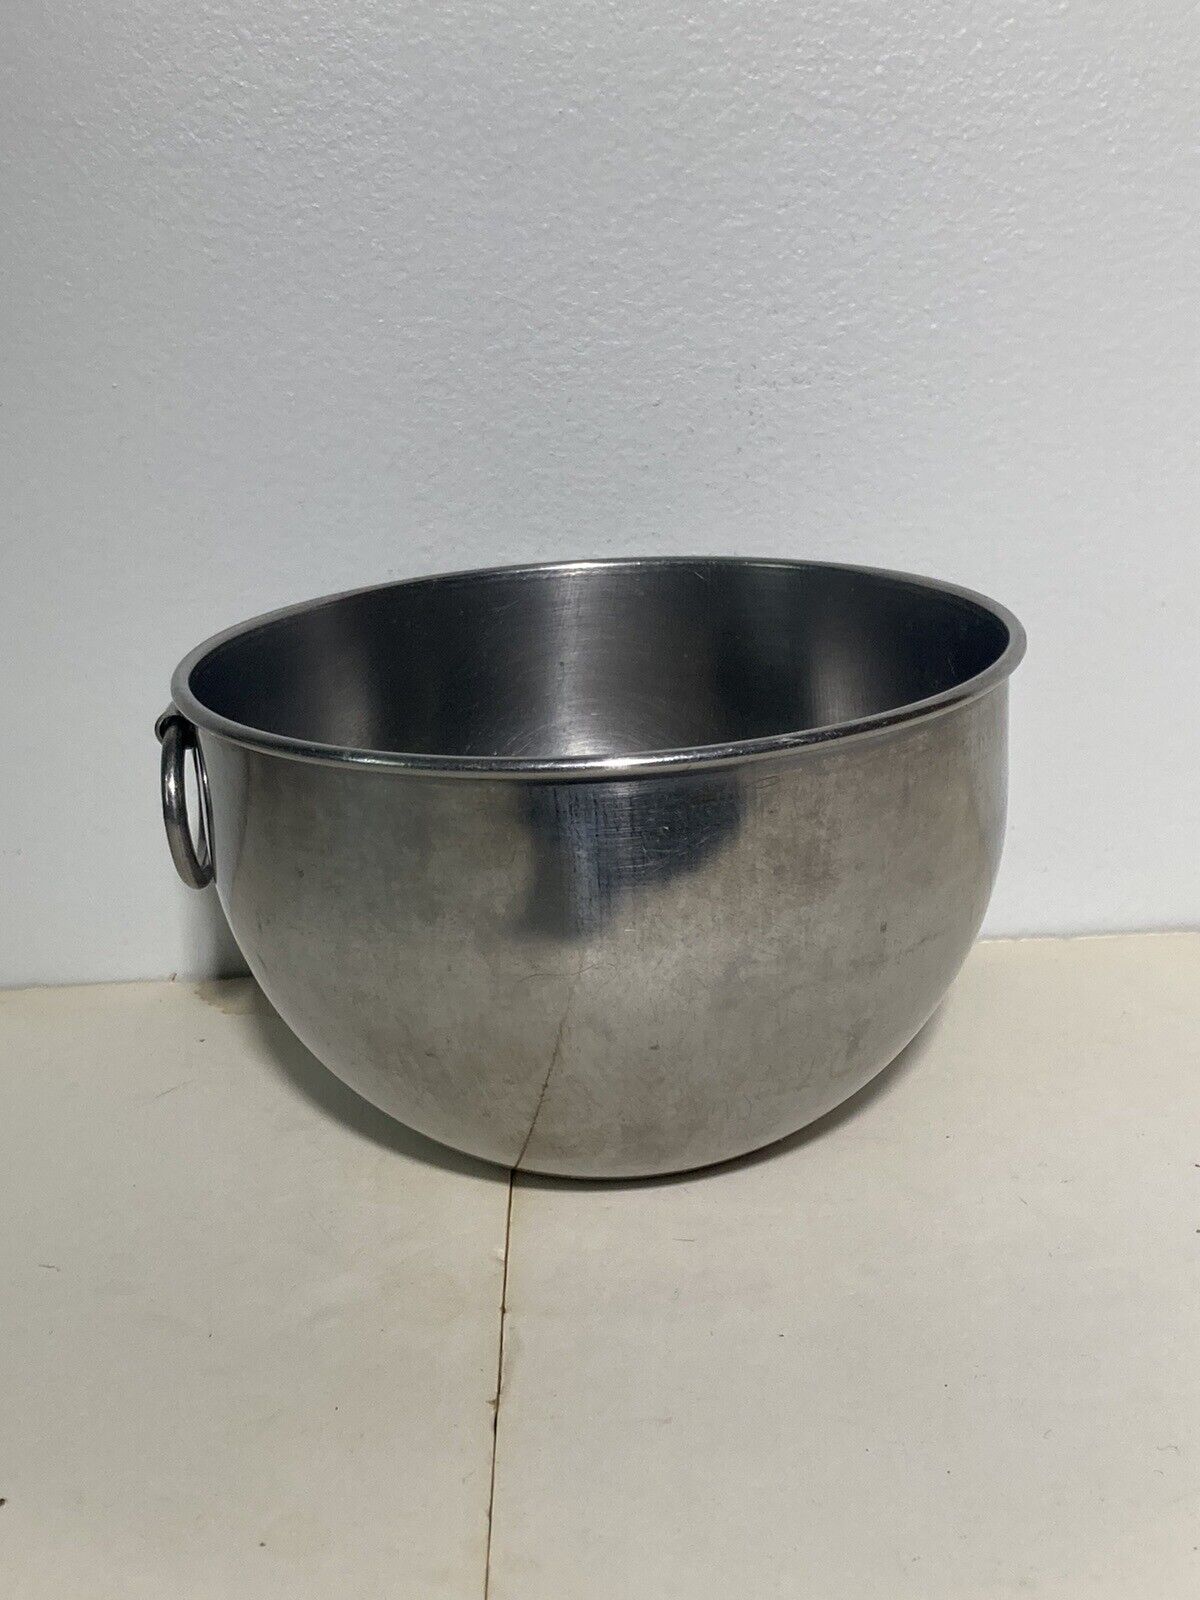 REVERE WARE 2 Qt Stainless Mixing Bowl w/ Round O Ring Pre-1968 Vintage